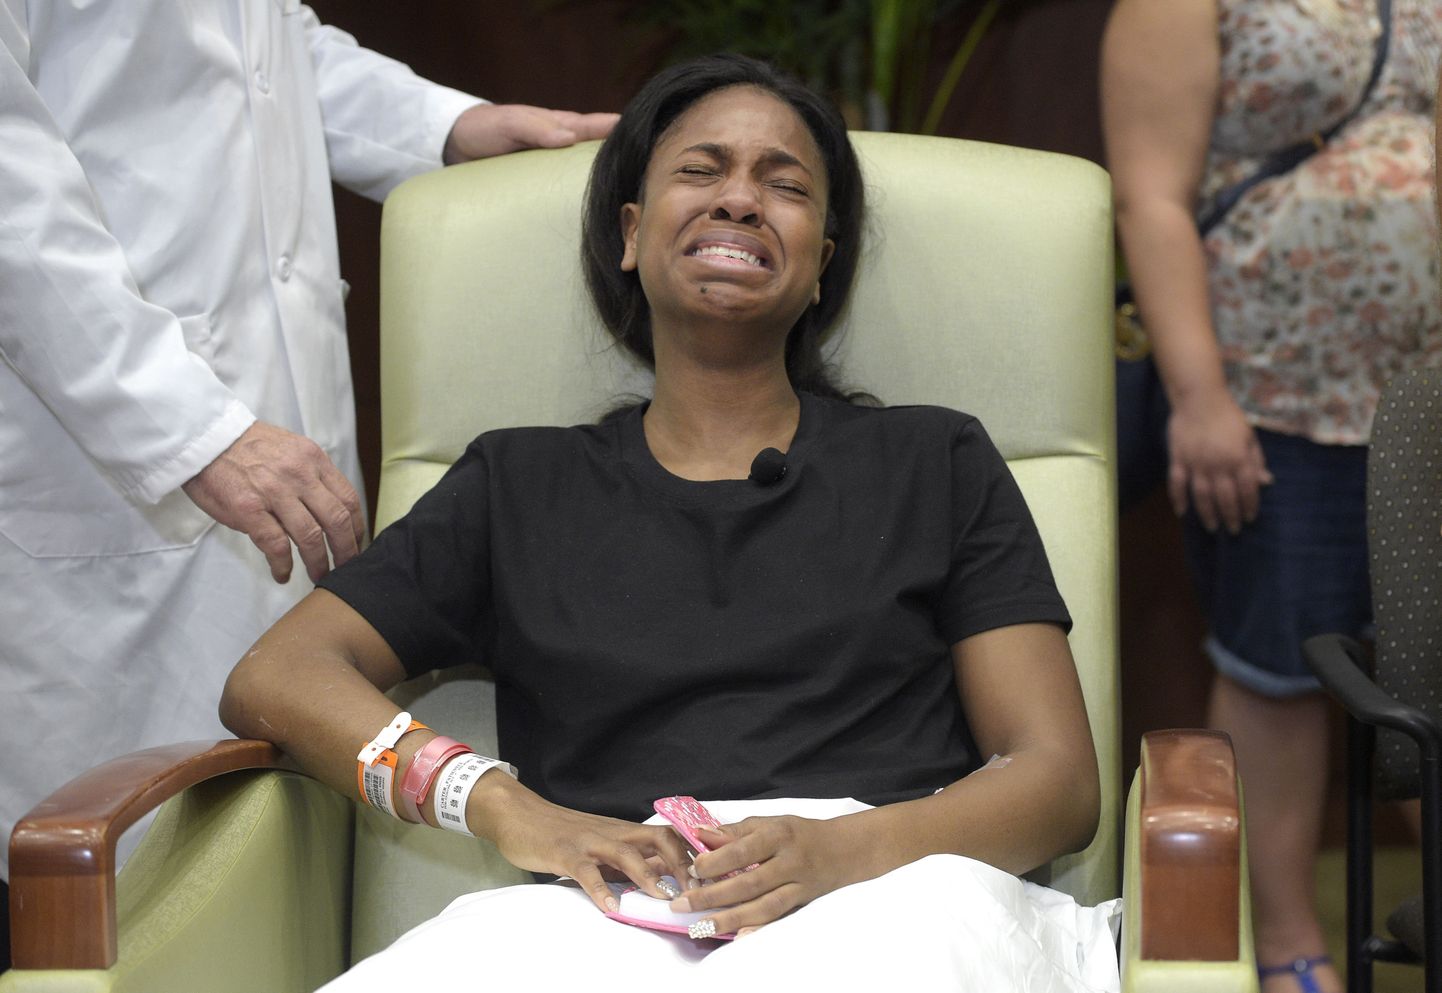 Patience Carter, a victim in the Pulse nightclub shooting from Philadelphia, becomes emotional after giving her story during a news conference at Florida Hospital Orlando, Tuesday, June 14, 2016, in Orlando, Fla. Carter, a 20-year-old Philadelphian, was visiting Florida for the first time, vacationing with her two friends. (AP Photo/Phelan M. Ebenhack)